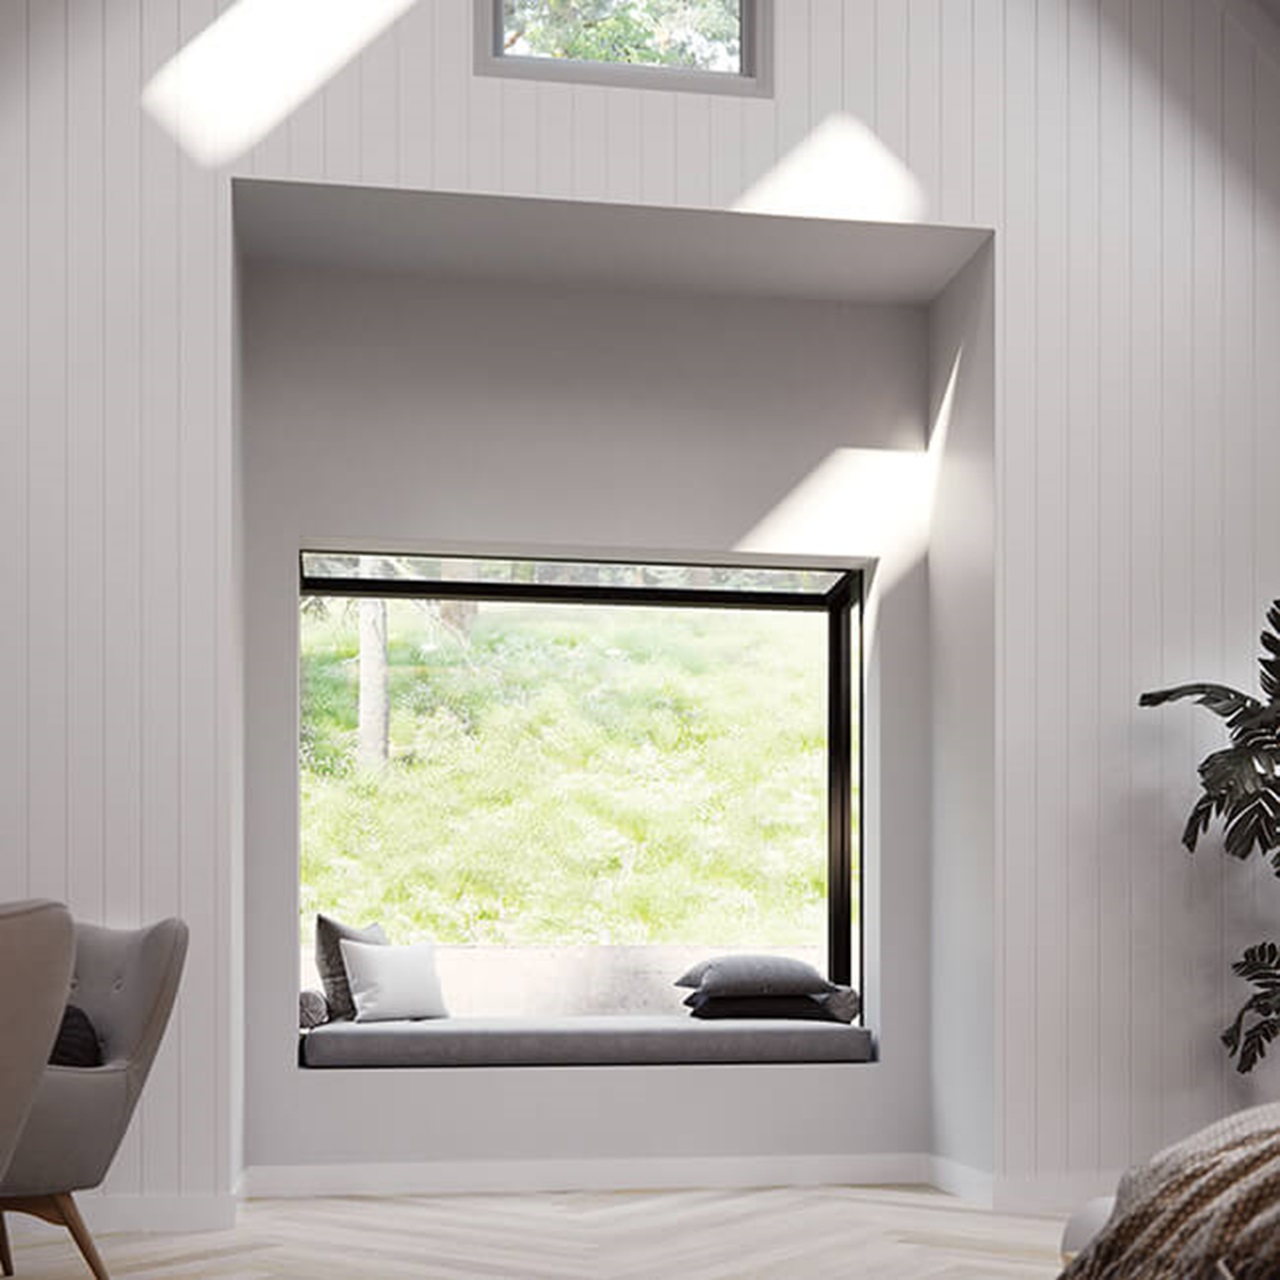 Interior room with Marvin Skycove window box